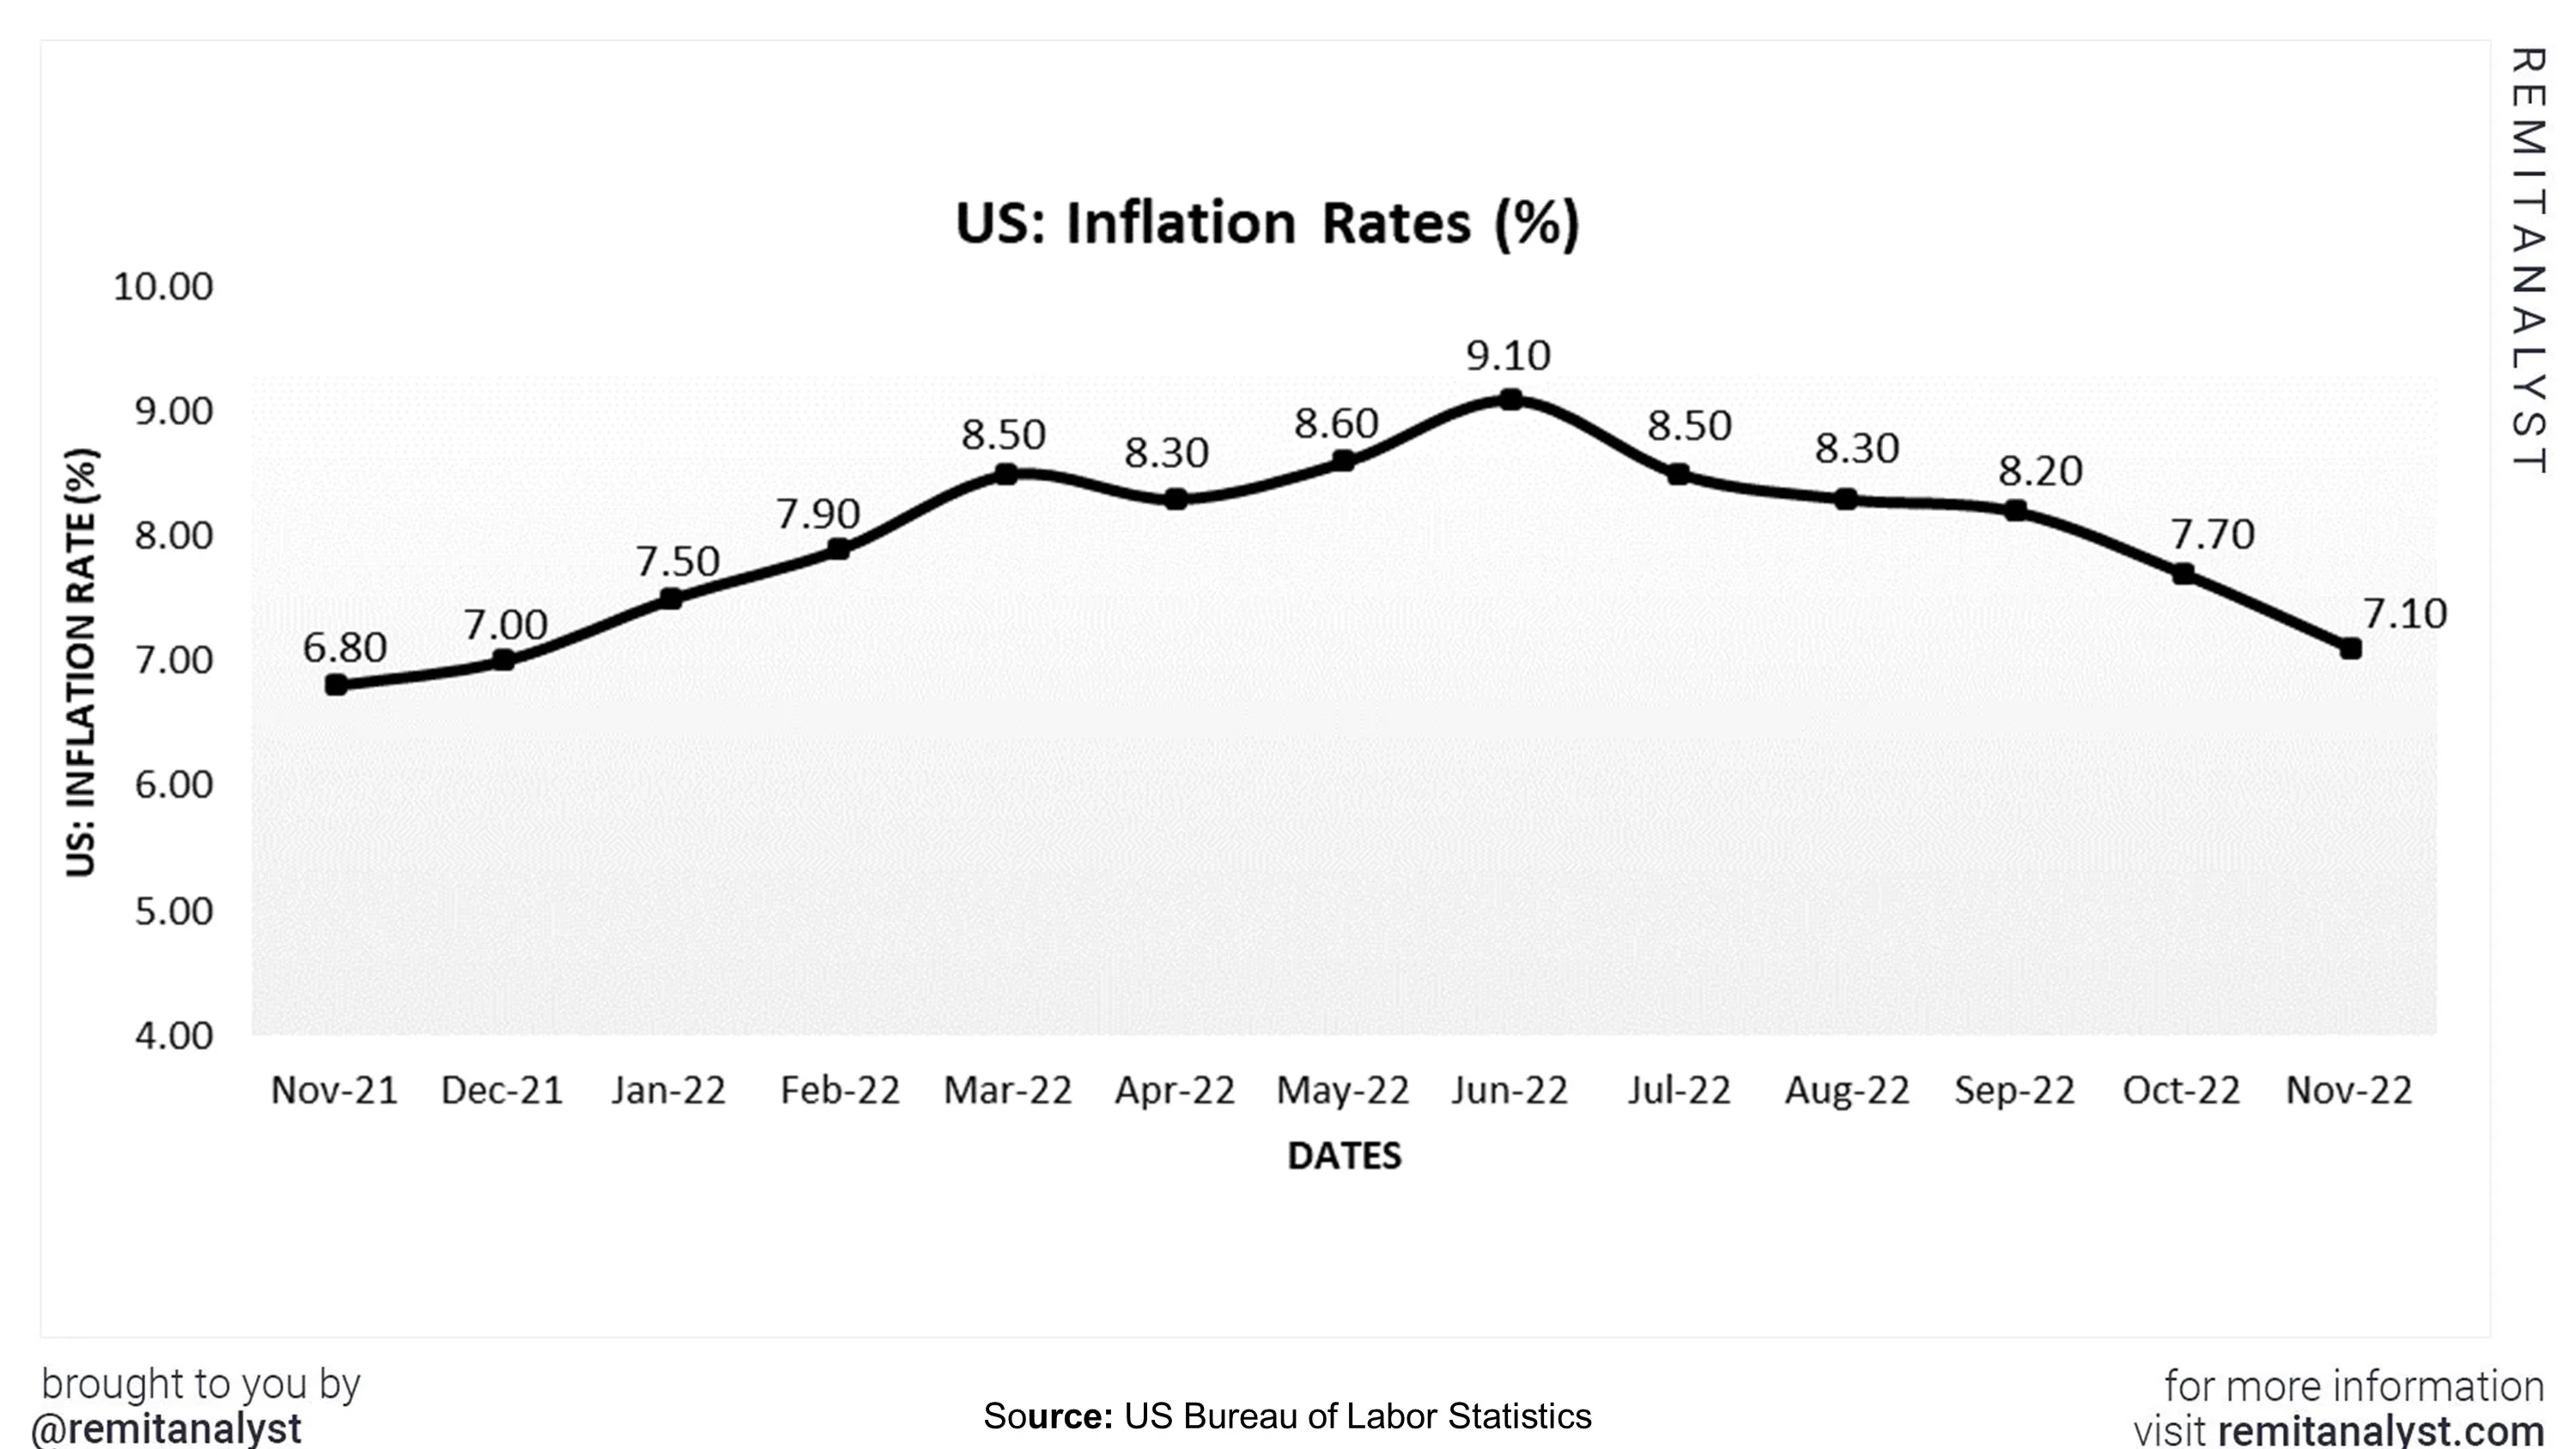 inflation-rates-in-us-from-nov-2021-to-nov-2022